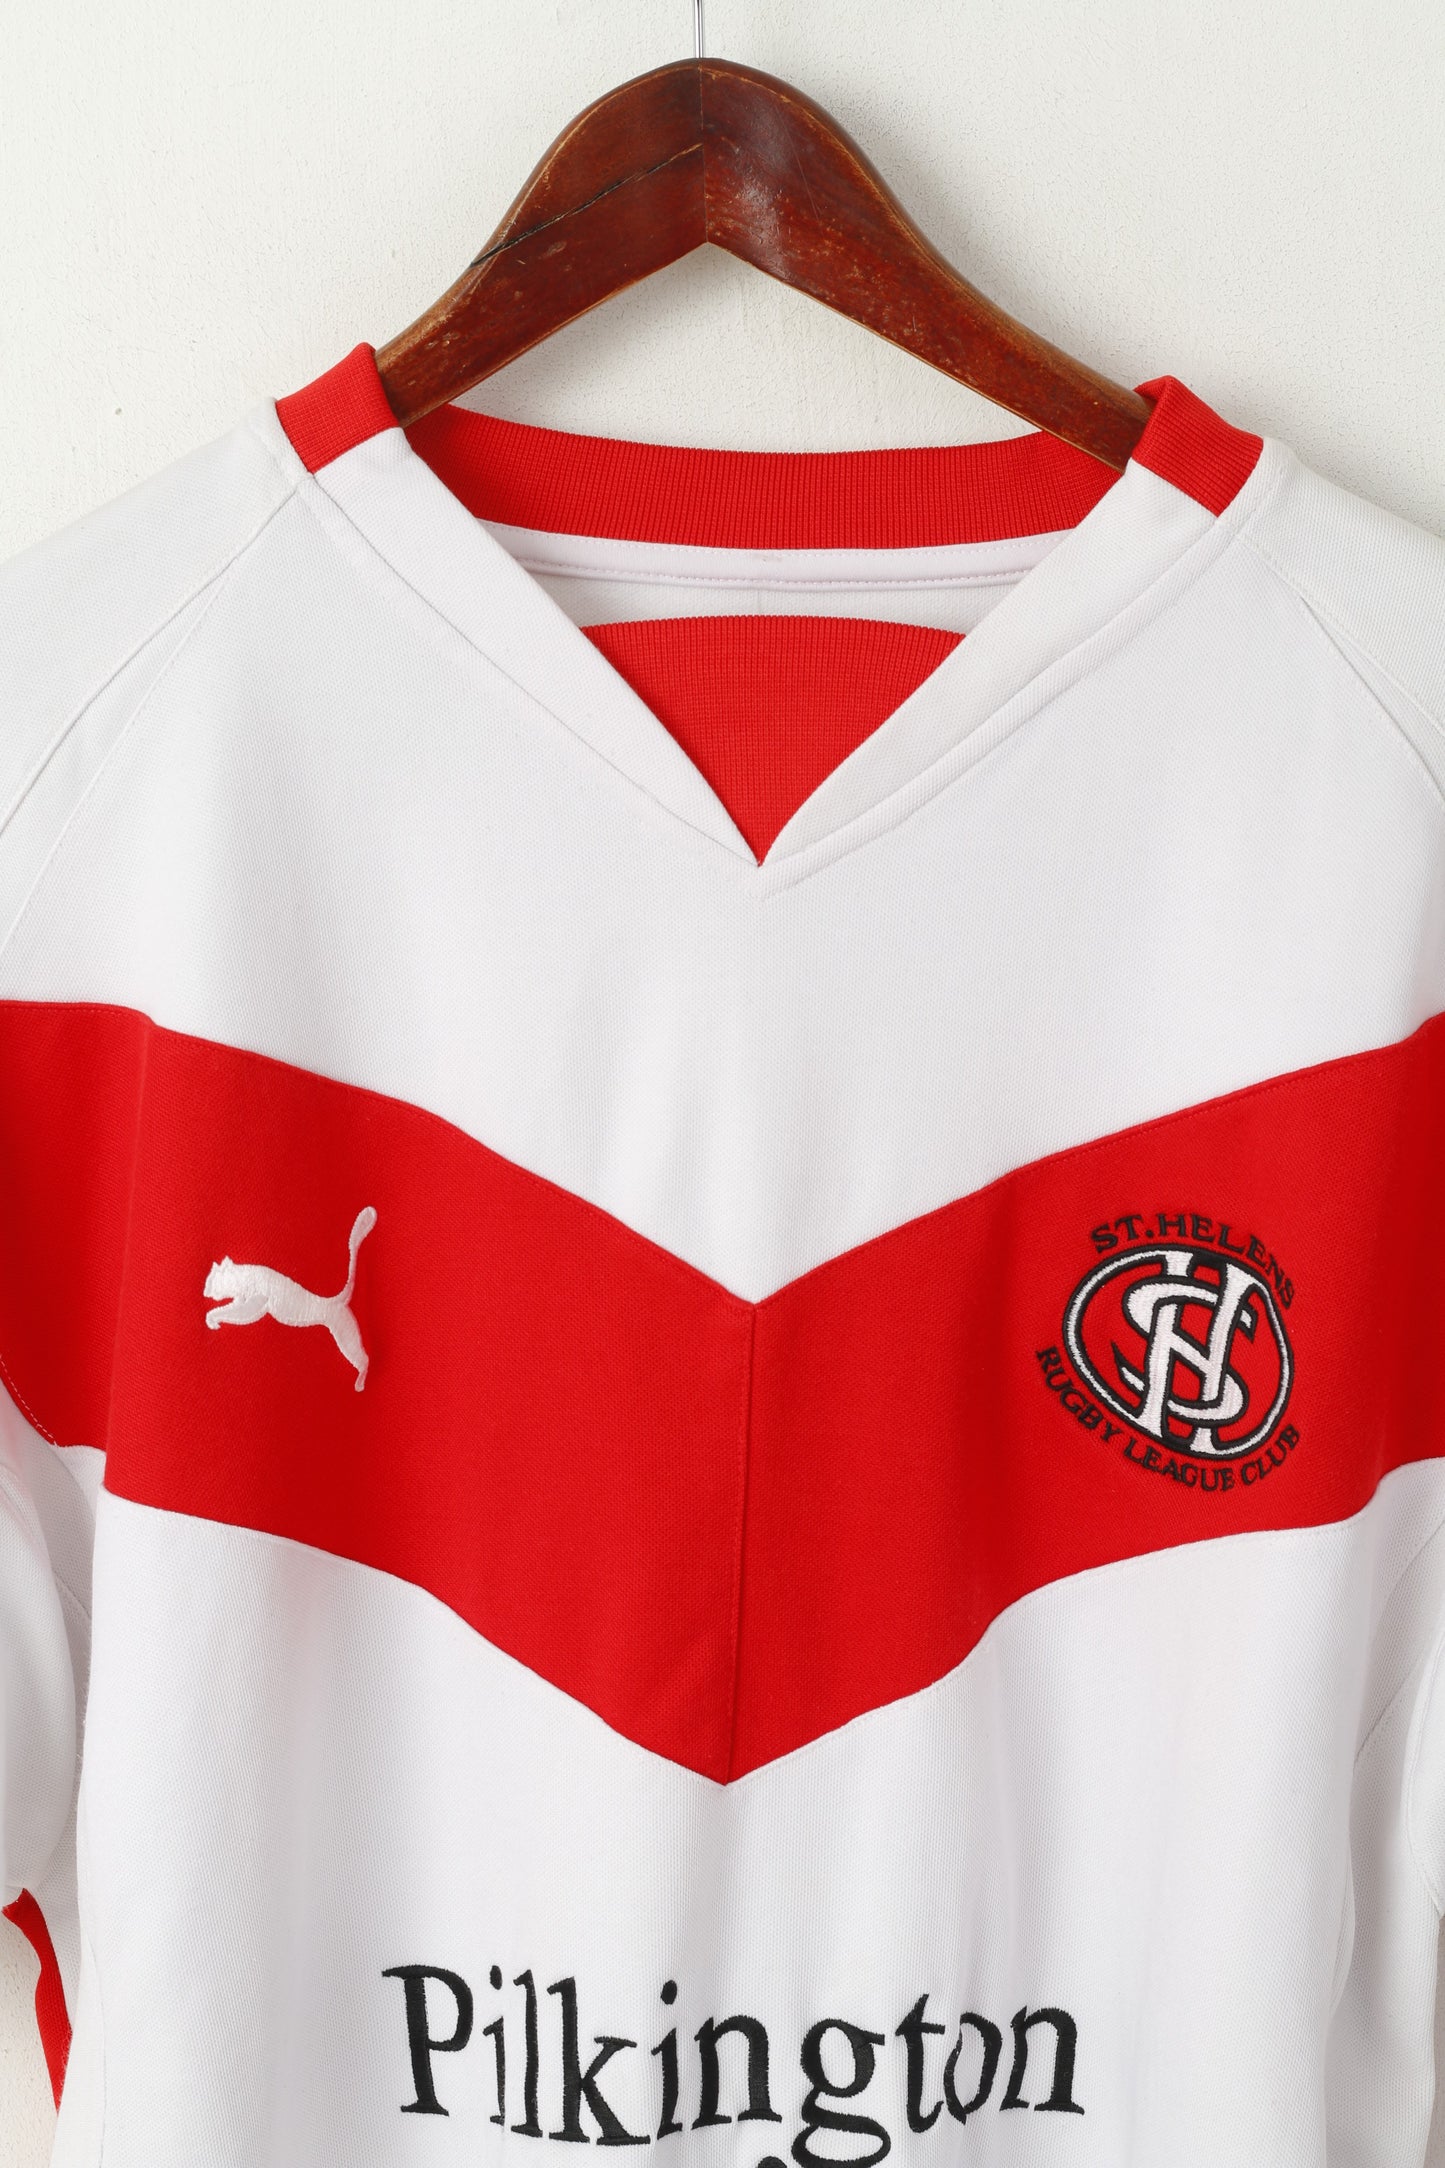 Puma Hommes L Chemise Blanc Rouge St. Hellens Rugby League Club Sportswear Jersey Top